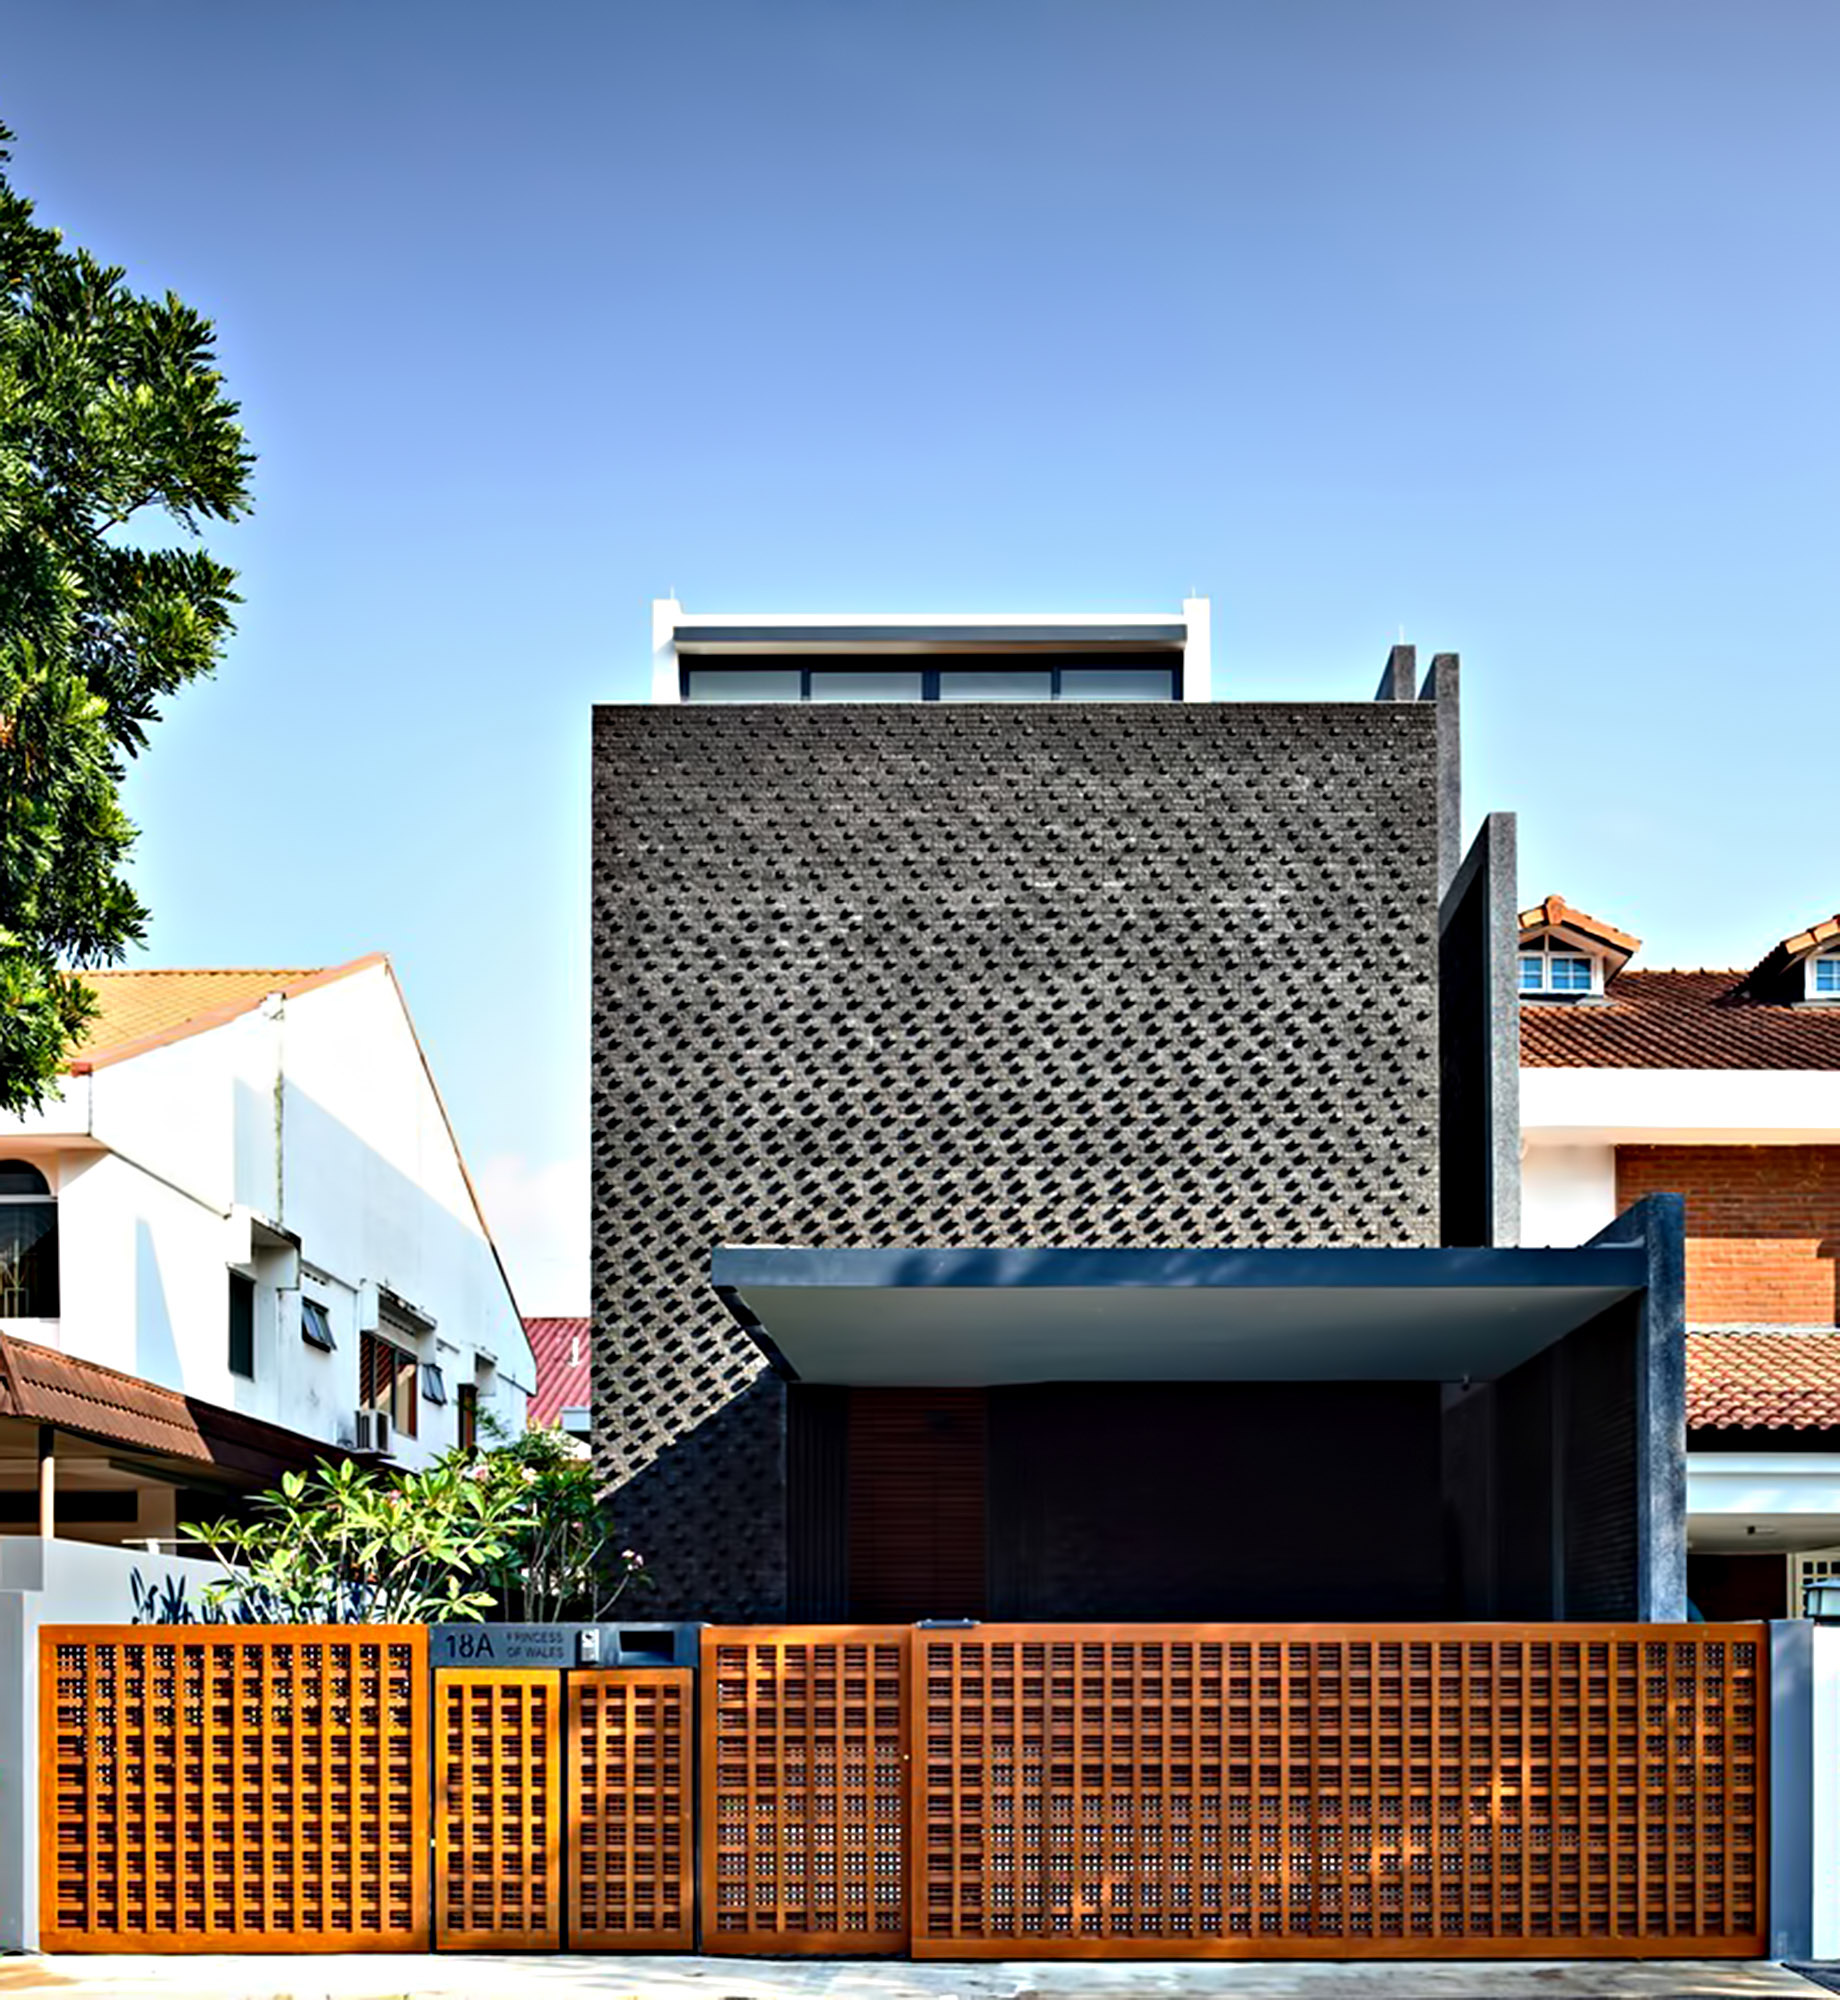 The Space Between Walls House – Prices of Wales Rd, Singapore